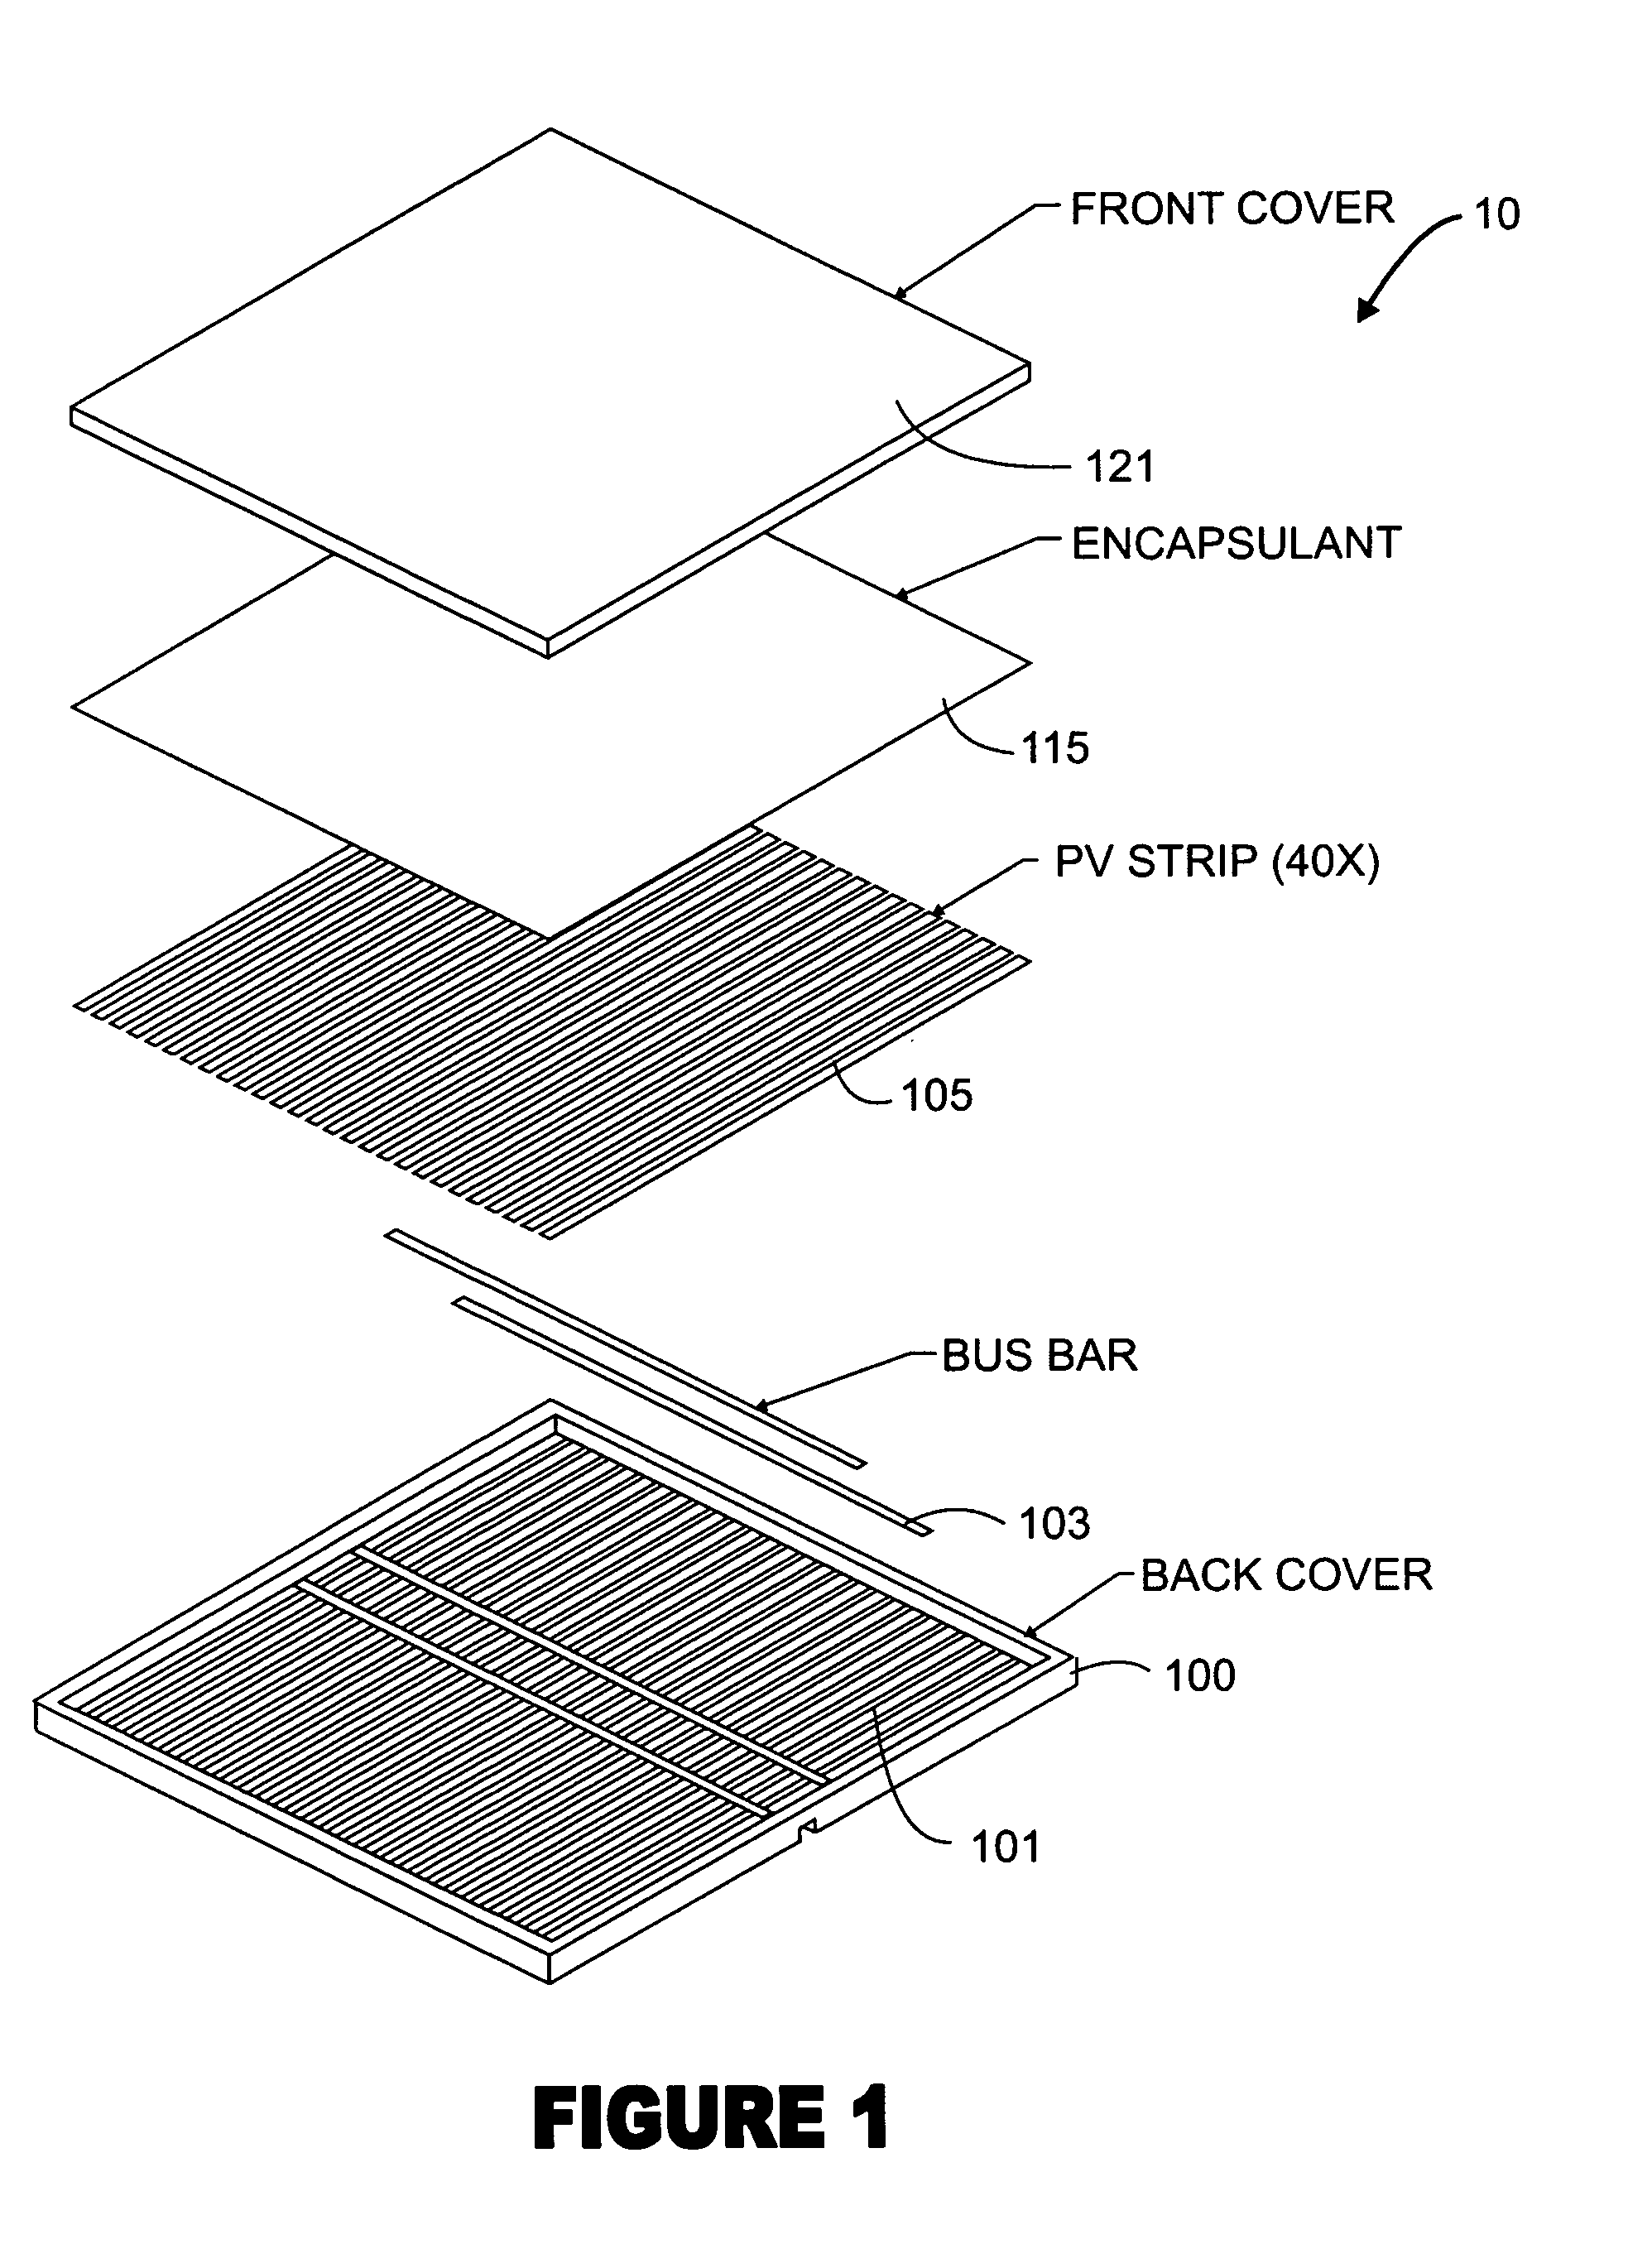 Fabrication process for photovoltaic cell